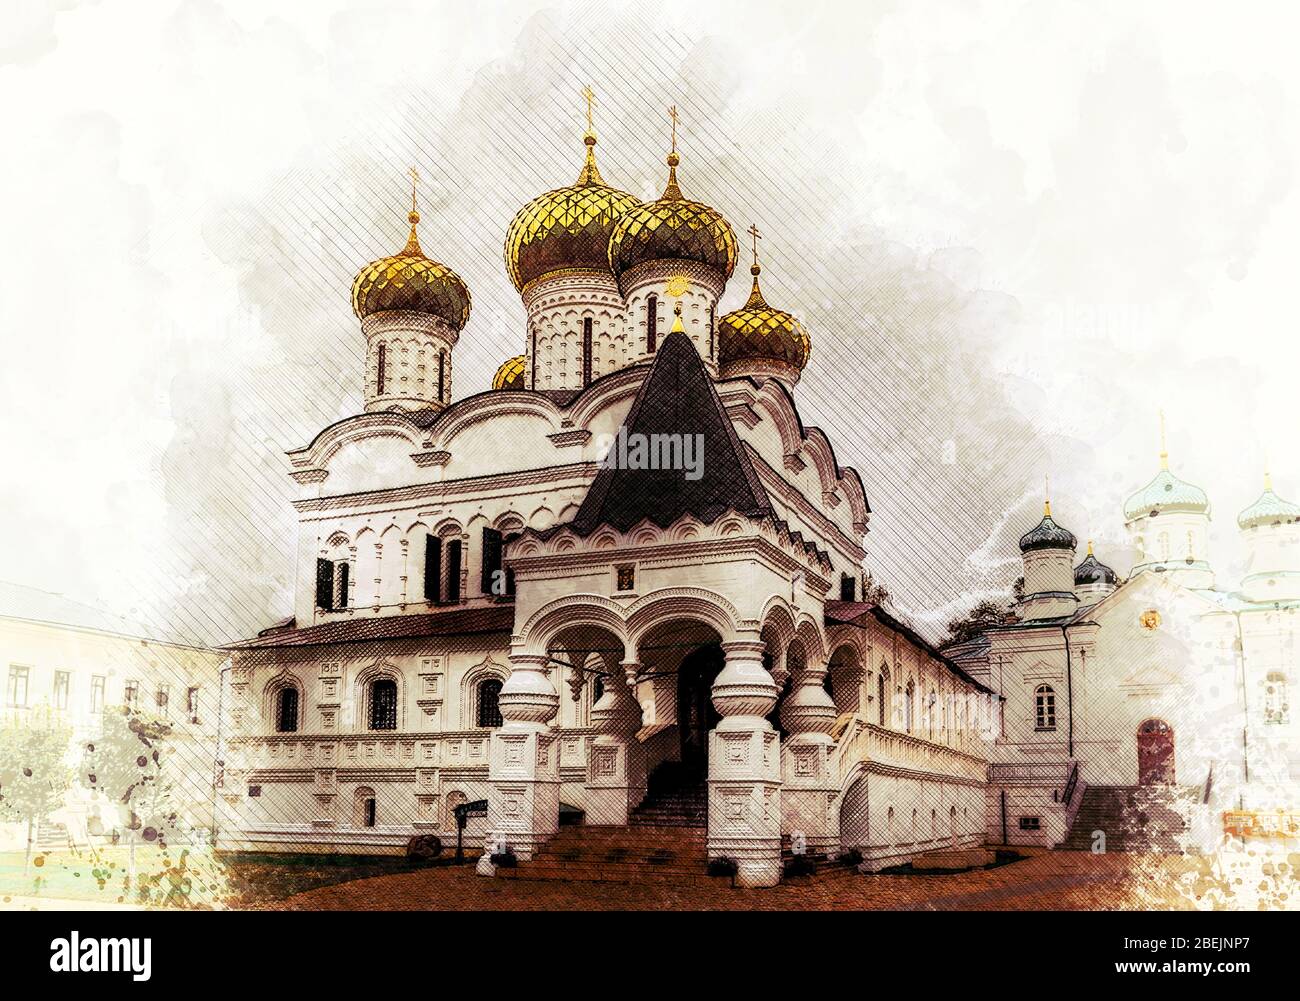 Watercolor styling - Holy Trinity Cathedral in Ipatiev Monastery, Kostroma, Golden Ring, Russia Stock Photo